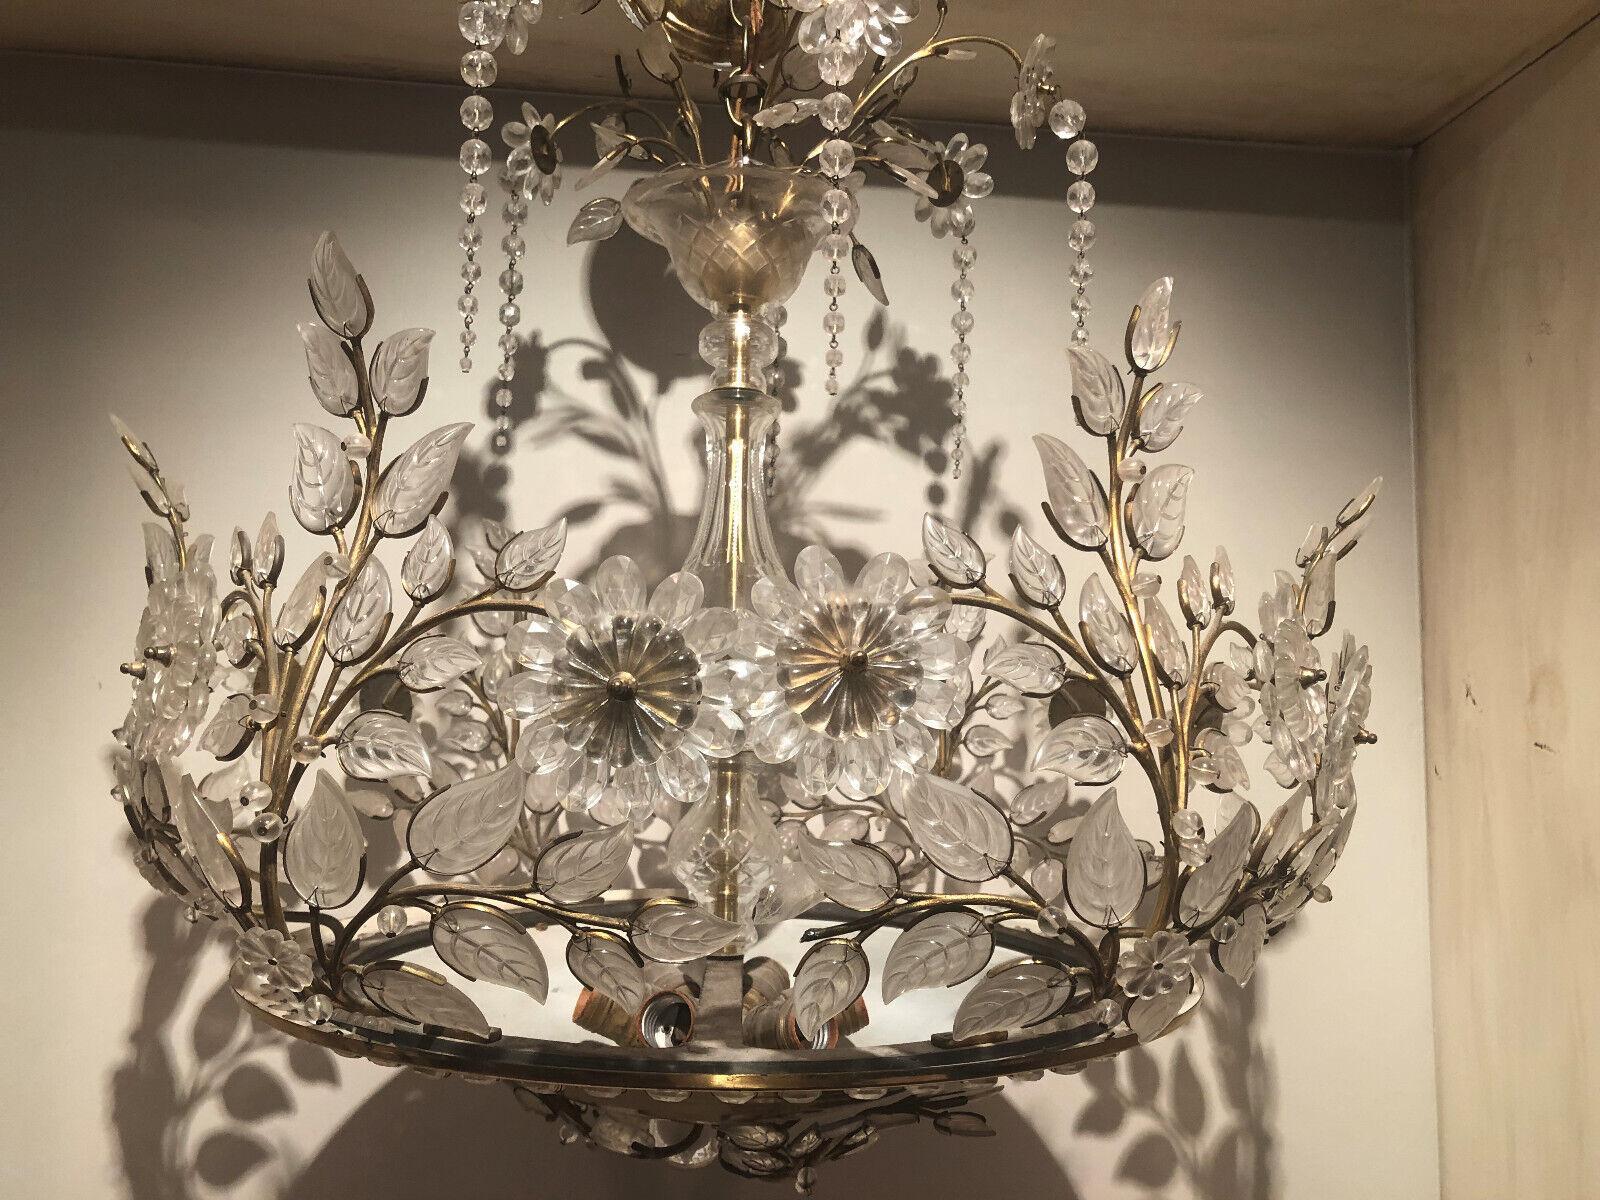 Large 1940's Hollywood Regency Cut Crystal Floral Petals and Vine Bouquet Chandelier attrib. Maison Bagues. 6 lights tucked in the basin. Loaded with blooming cut crystal flowers on bronze vines. Lovely flower petals abound. We purchased this